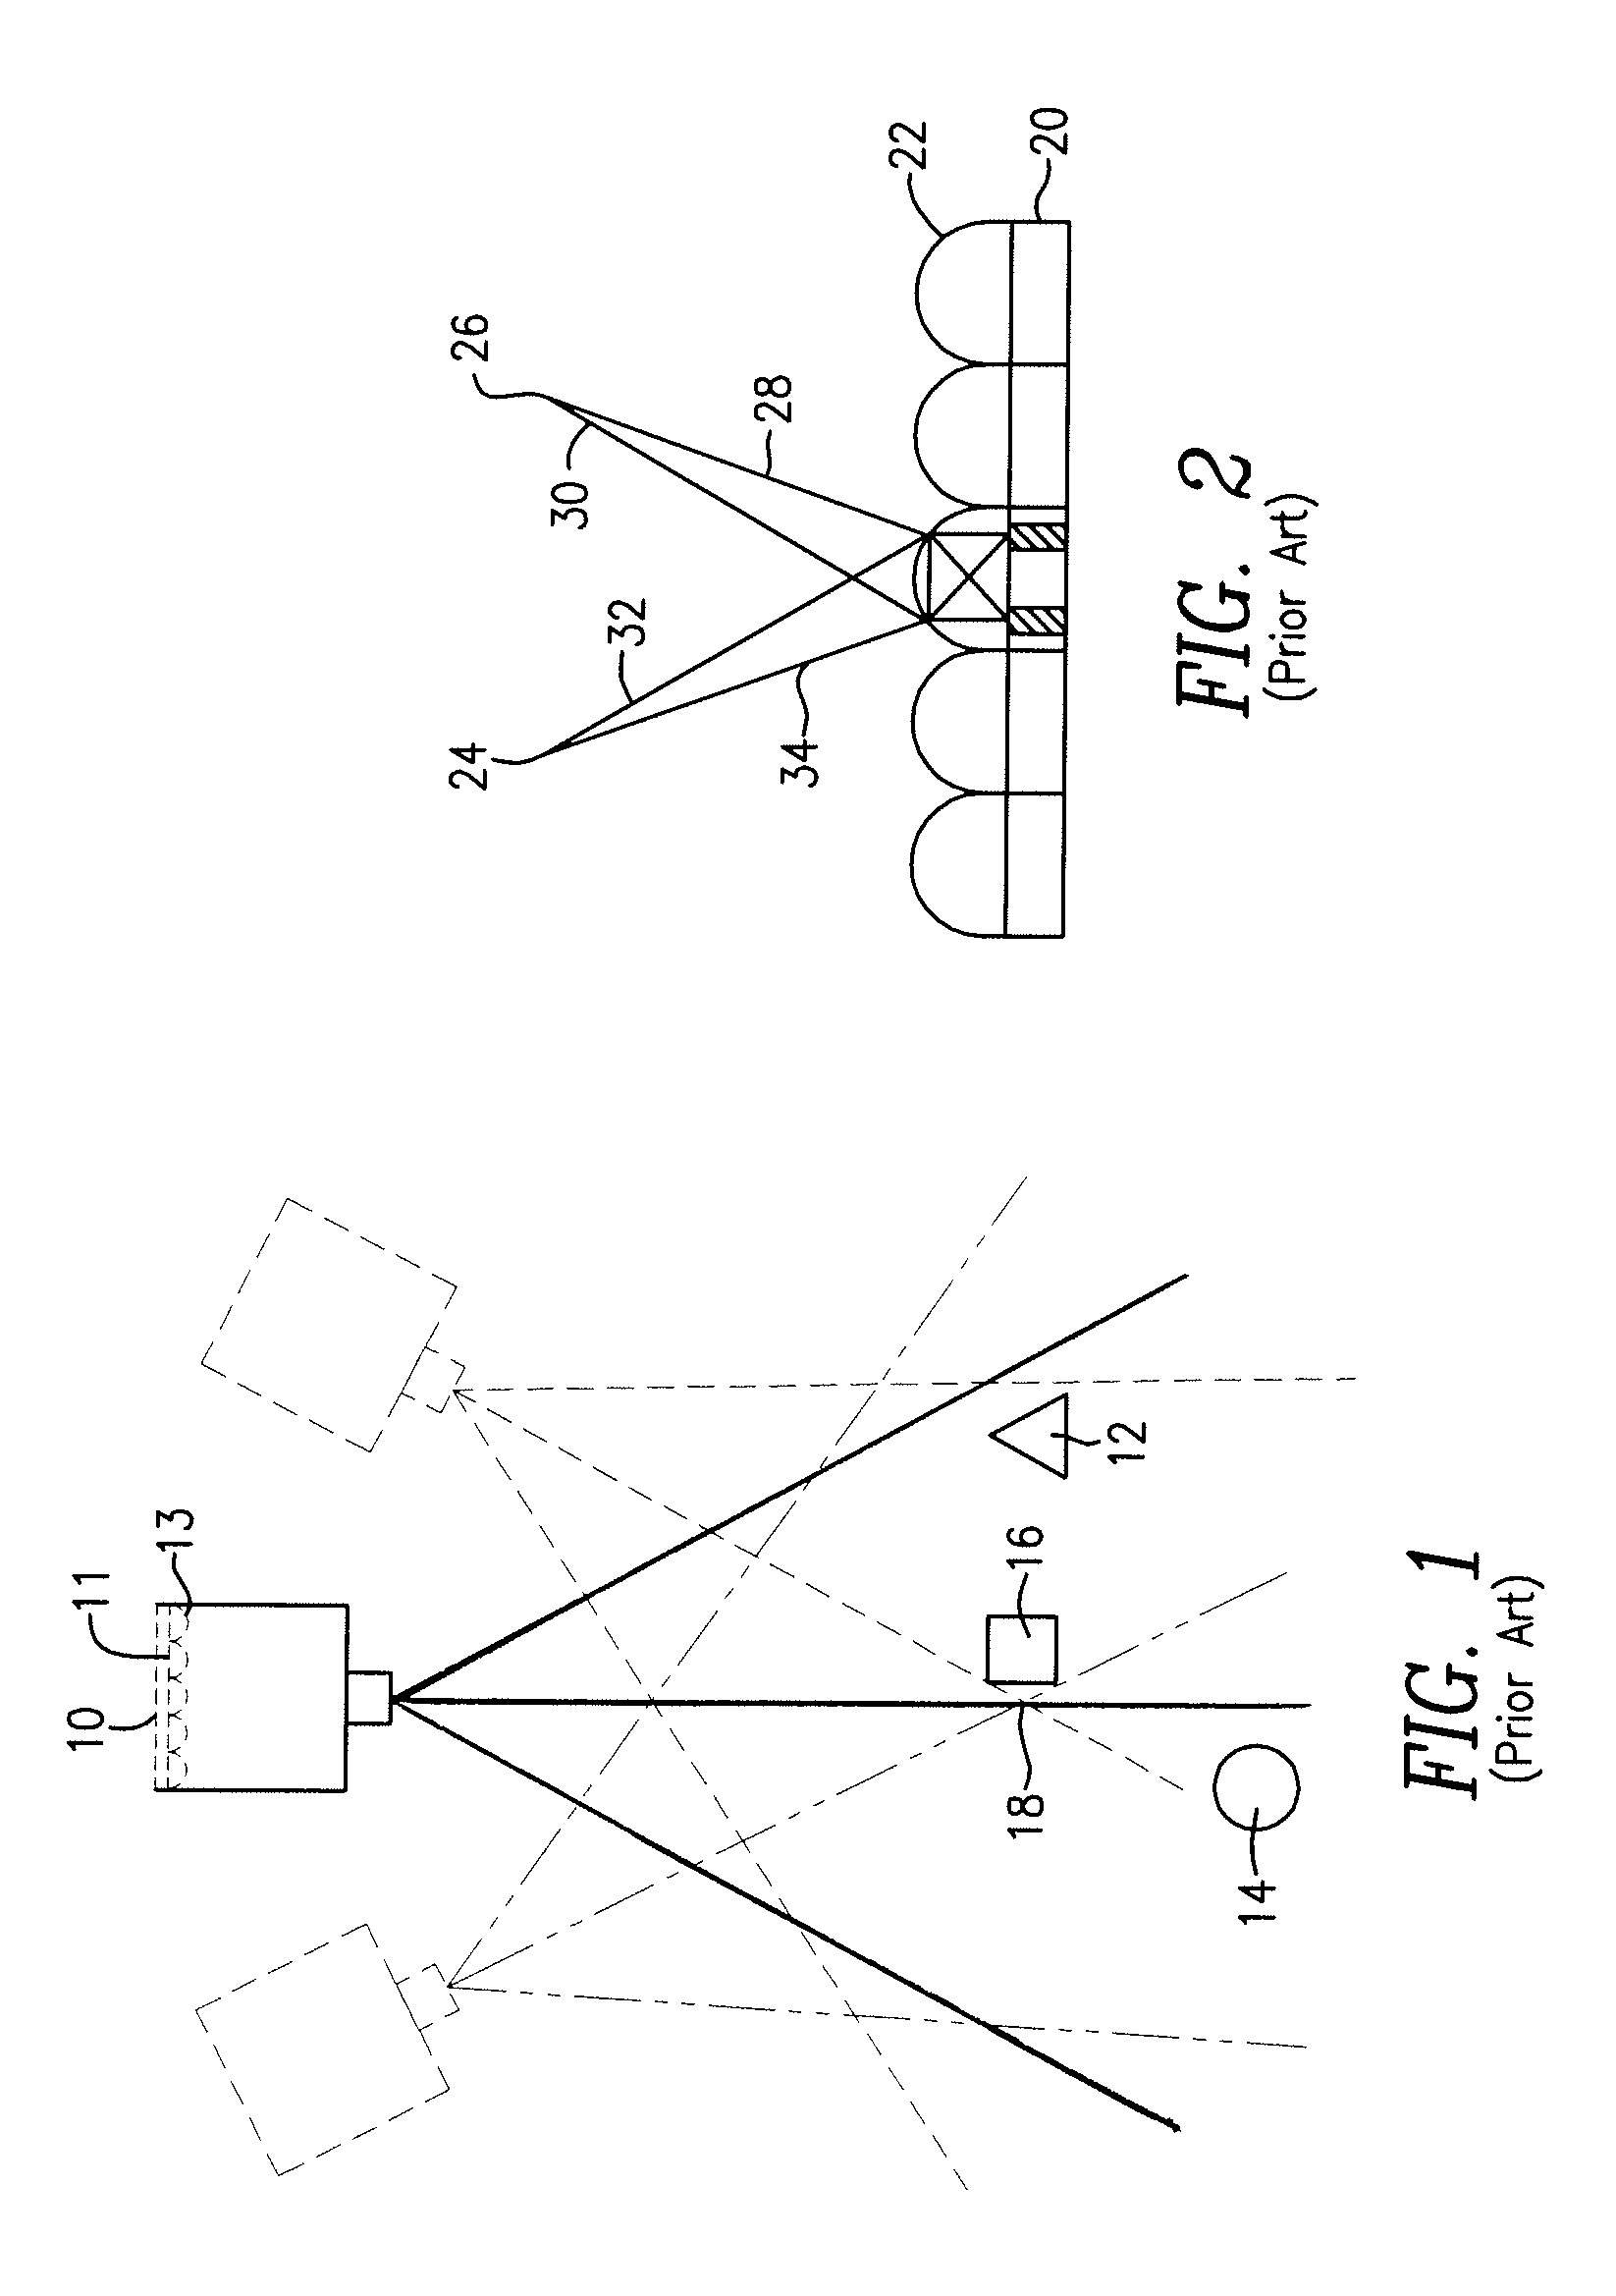 Advance in Transmission and Display of Multi-Dimensional Images for Digital Monitors and Television Receivers using a virtual lens